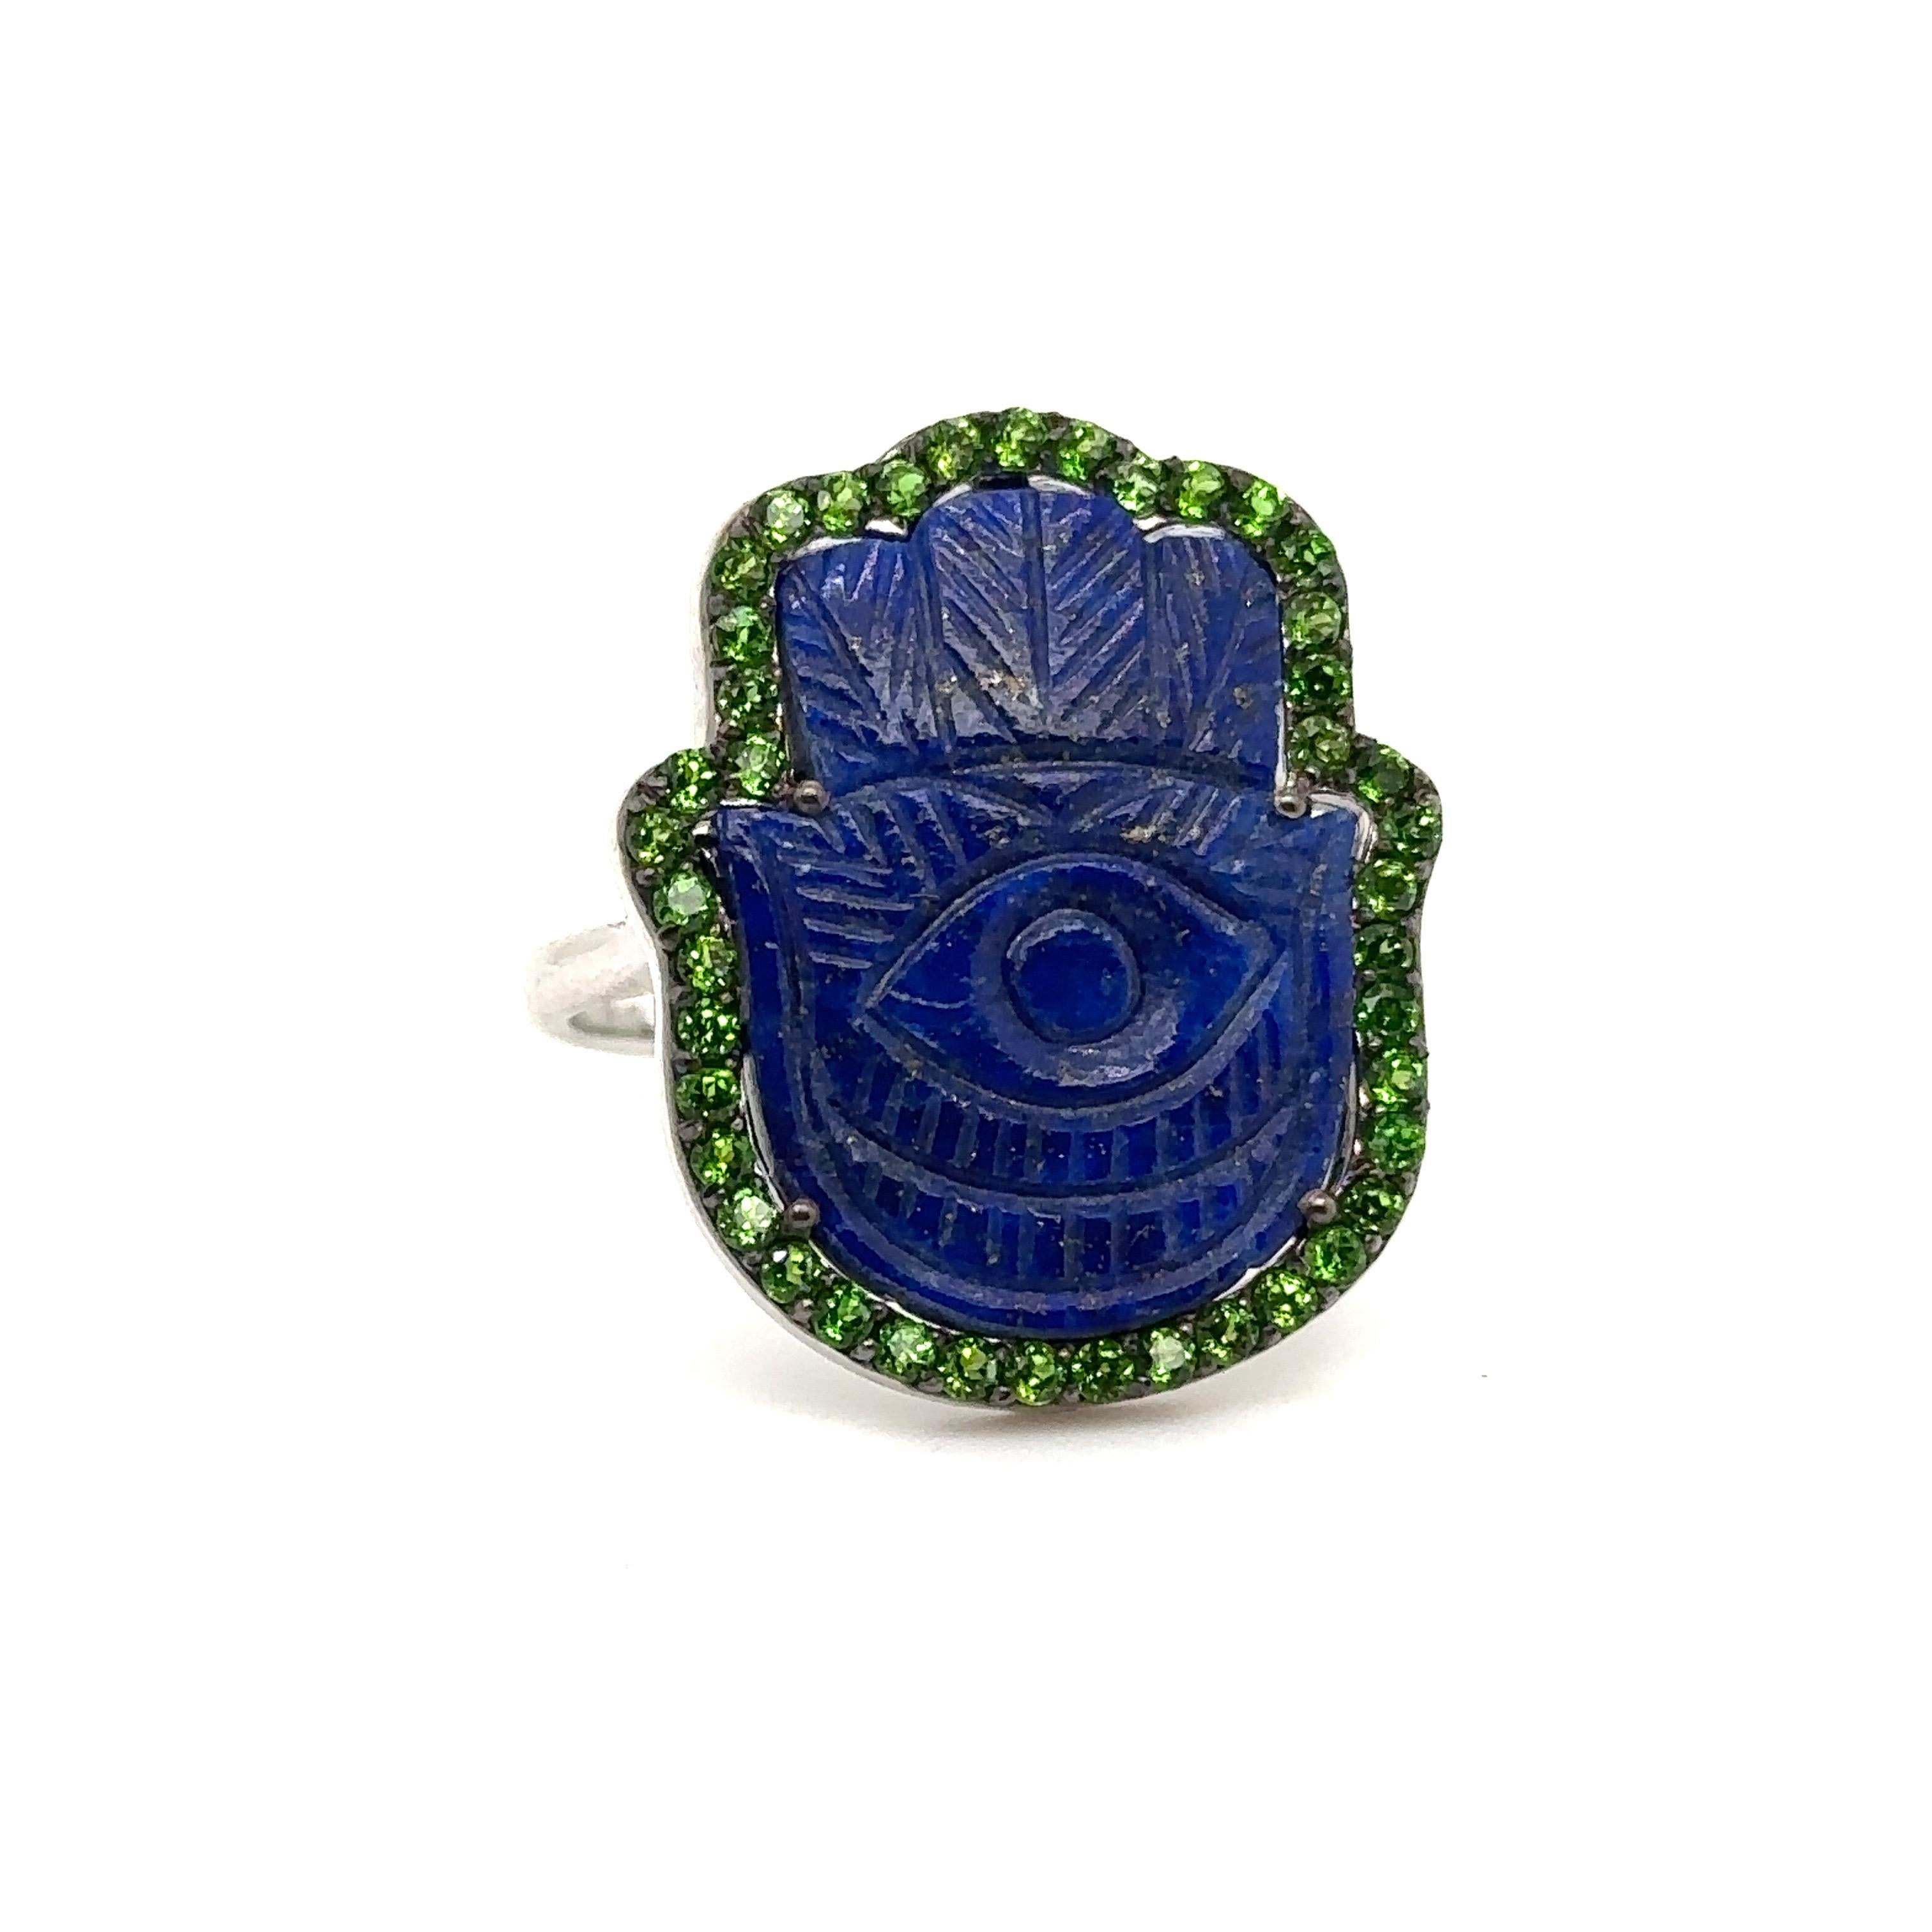 JAS-19-1962 - STERLING SILVER 10.00CT LAPIS HAMSA RING with CHROME DIOPSIDES 3